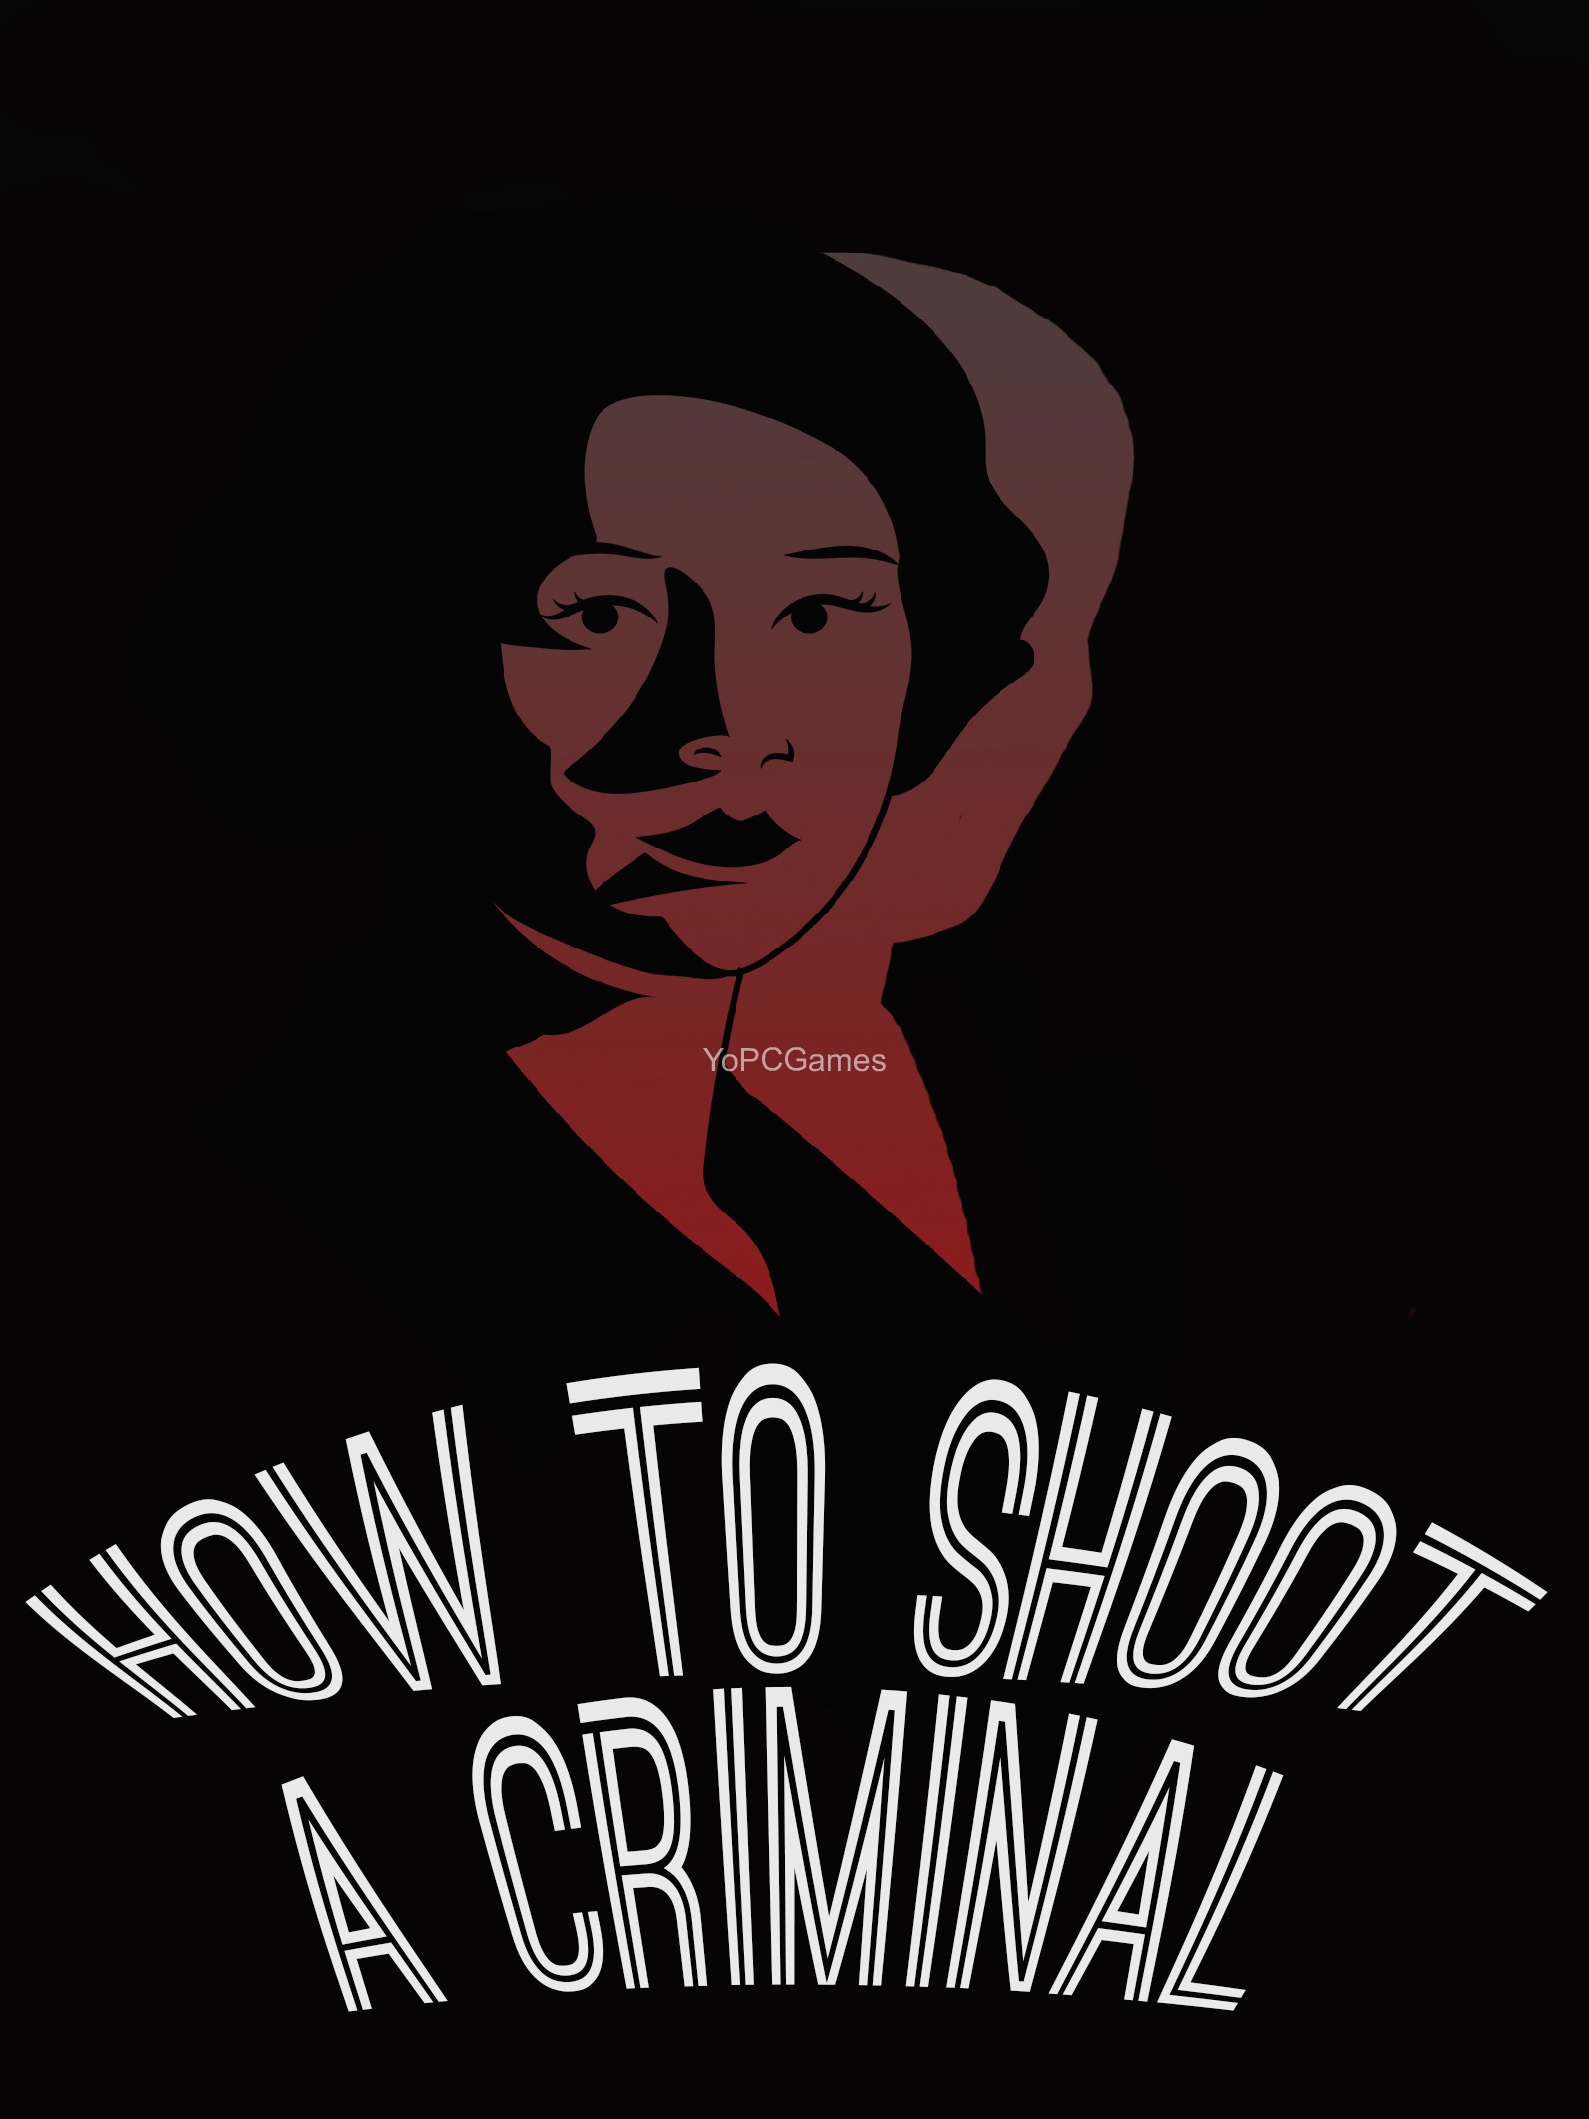 how to shoot a criminal pc game